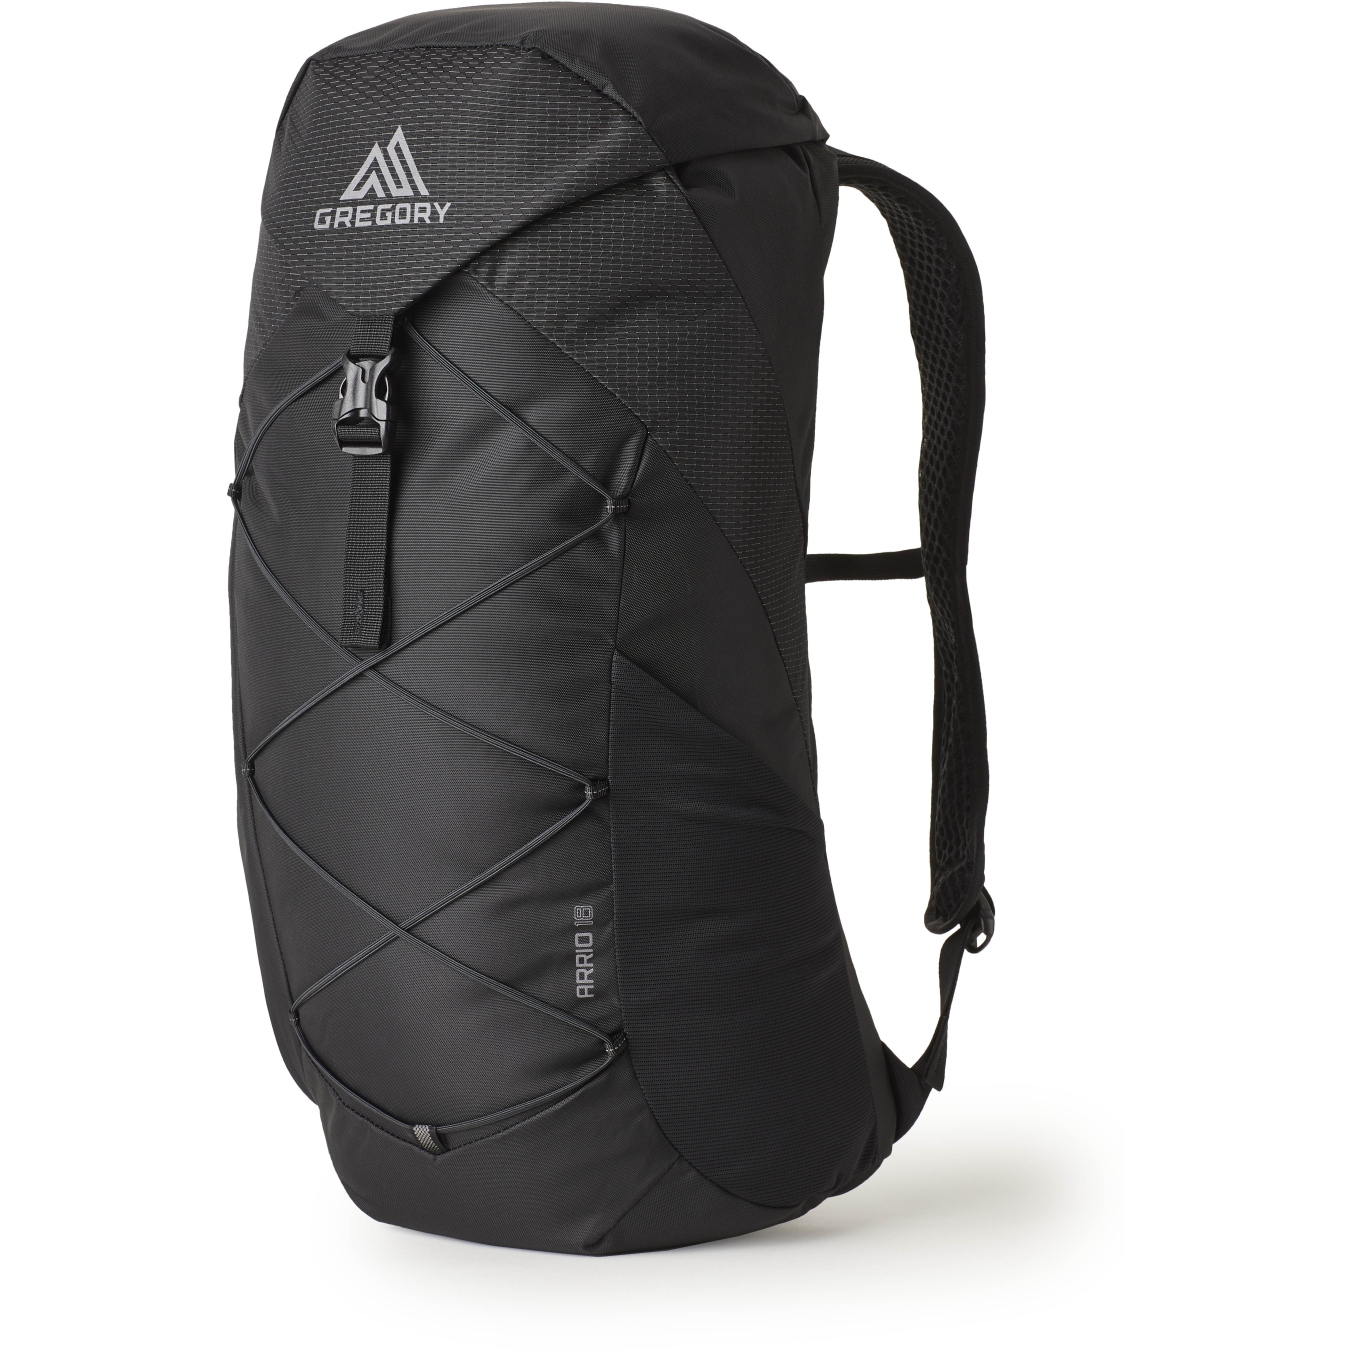 Picture of Gregory Arrio 18 Backpack - Flame Black